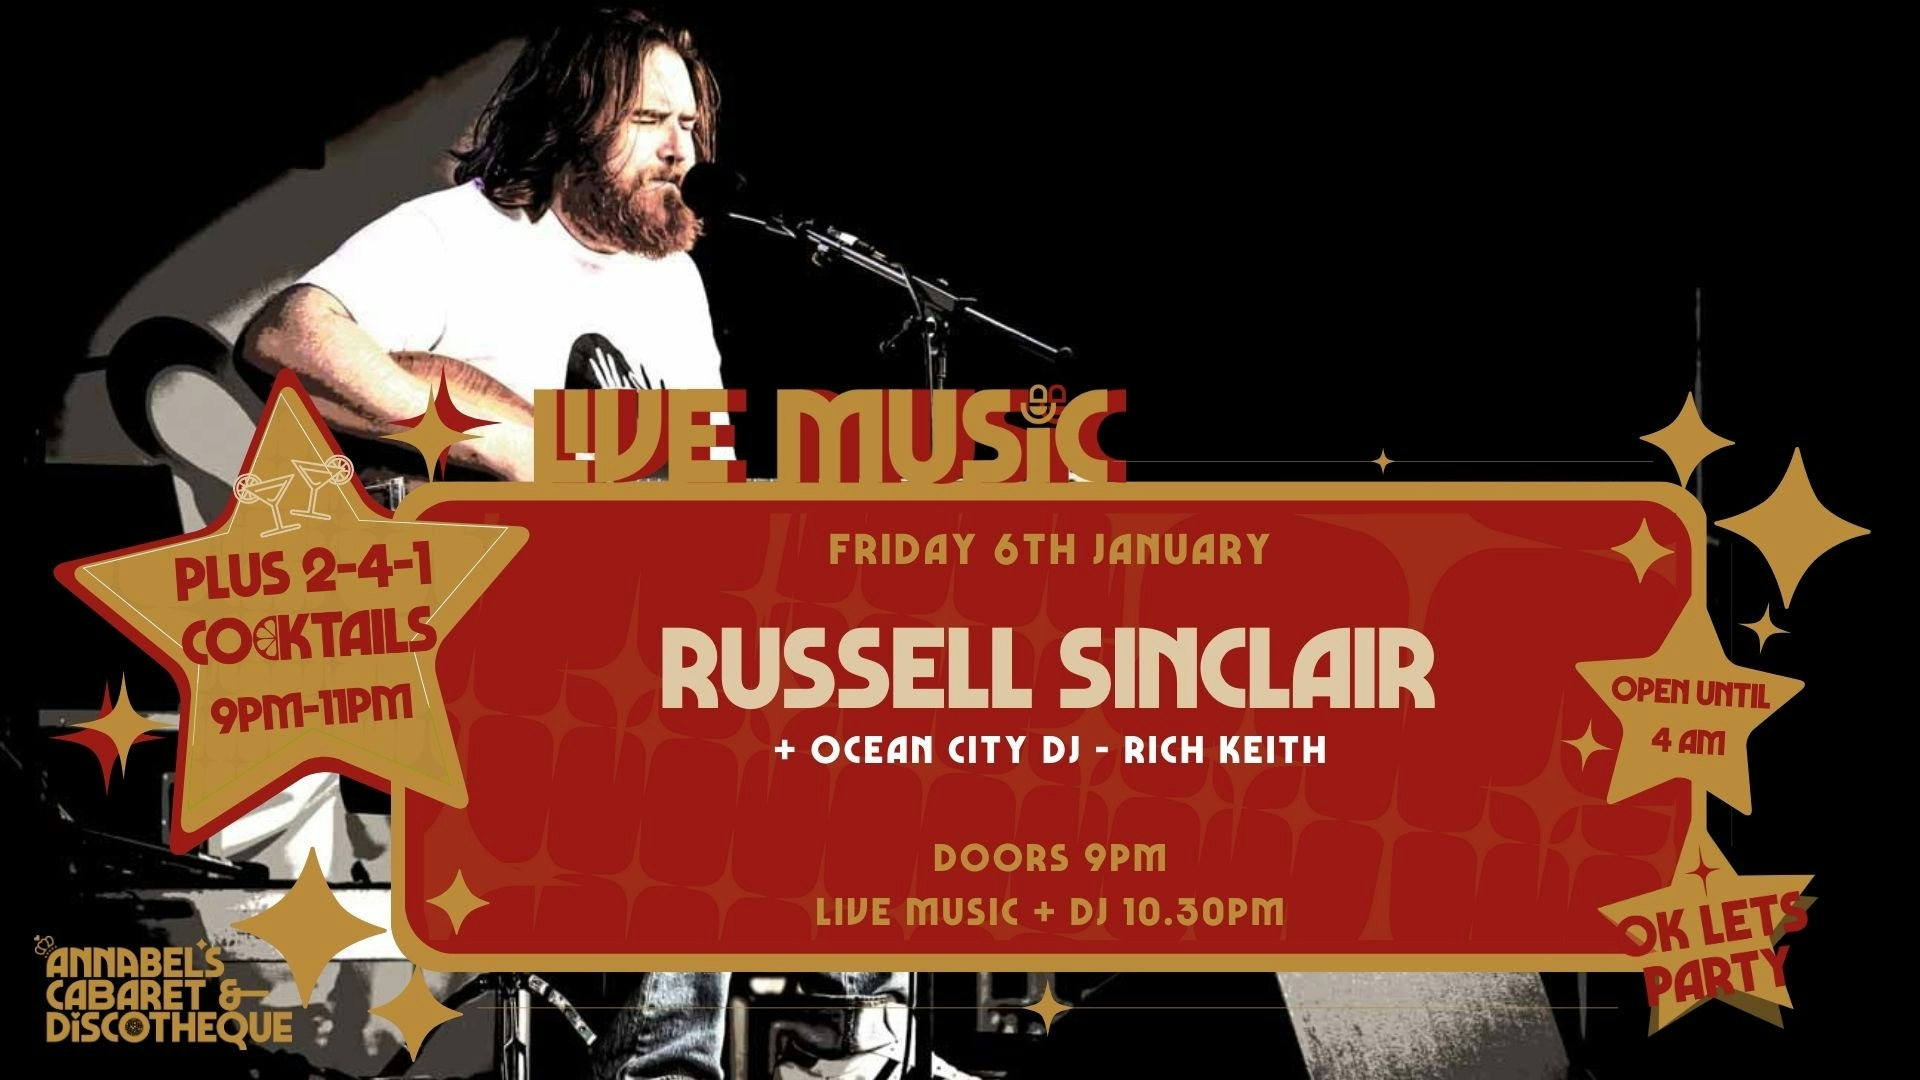 Live Music: RUSSELL SINCLAIR & THE SMOKIN’ LOCOS // Annabel’s Cabaret & Discotheque